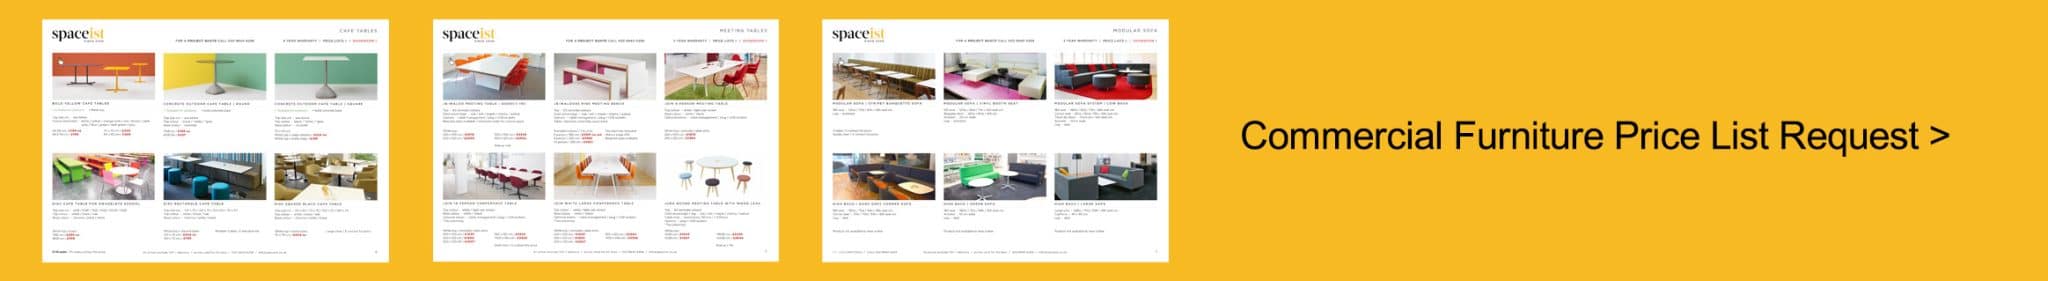 Commercial Furniture Price List Request